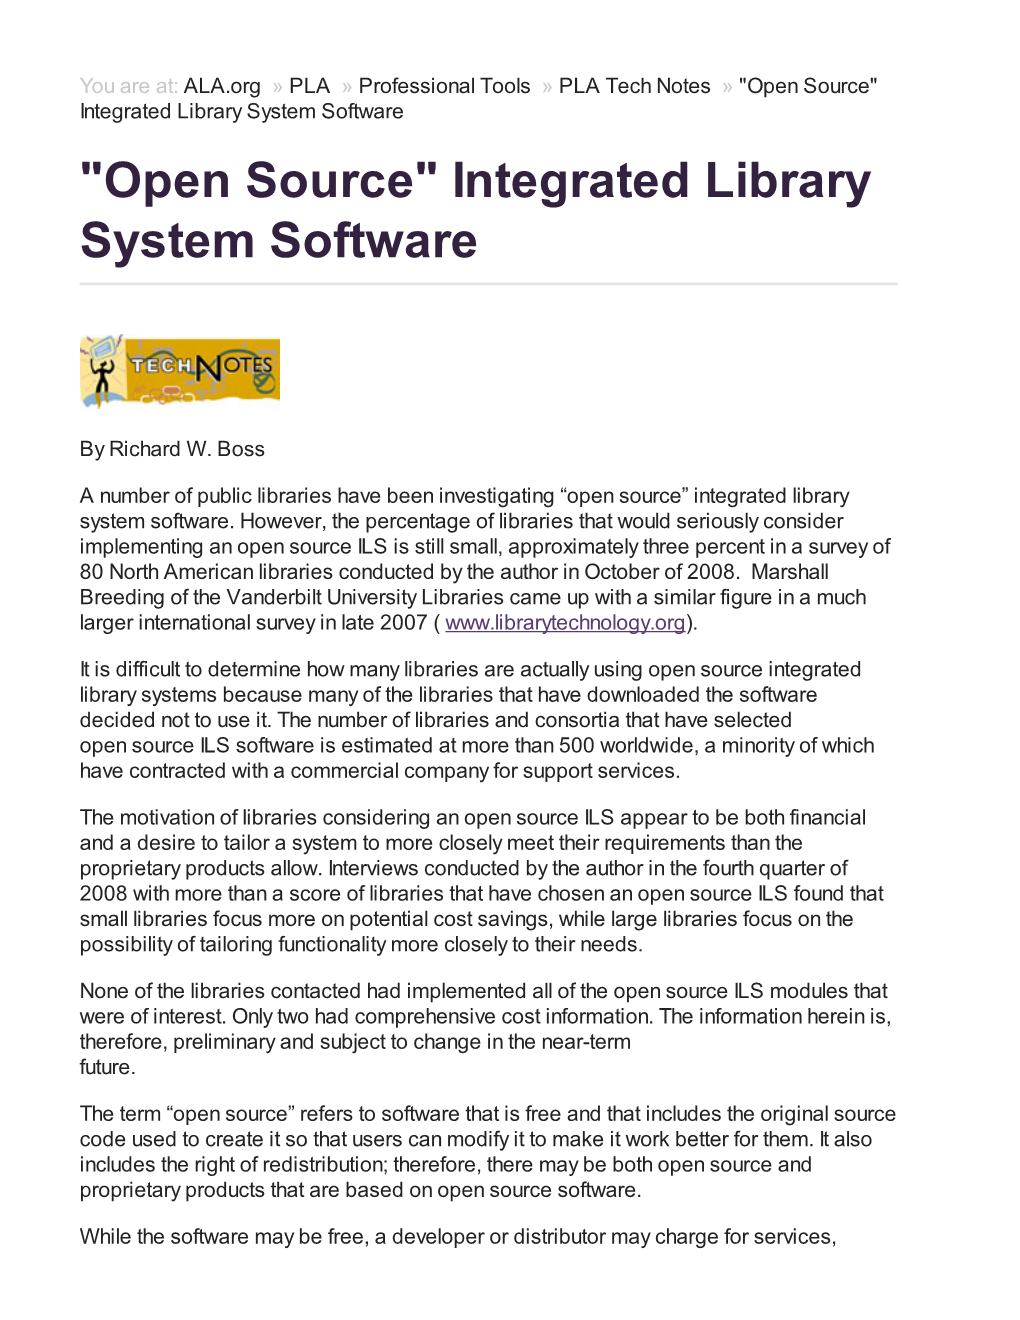 "Open Source" Integrated Library System Software "Open Source" Integrated Library System Software